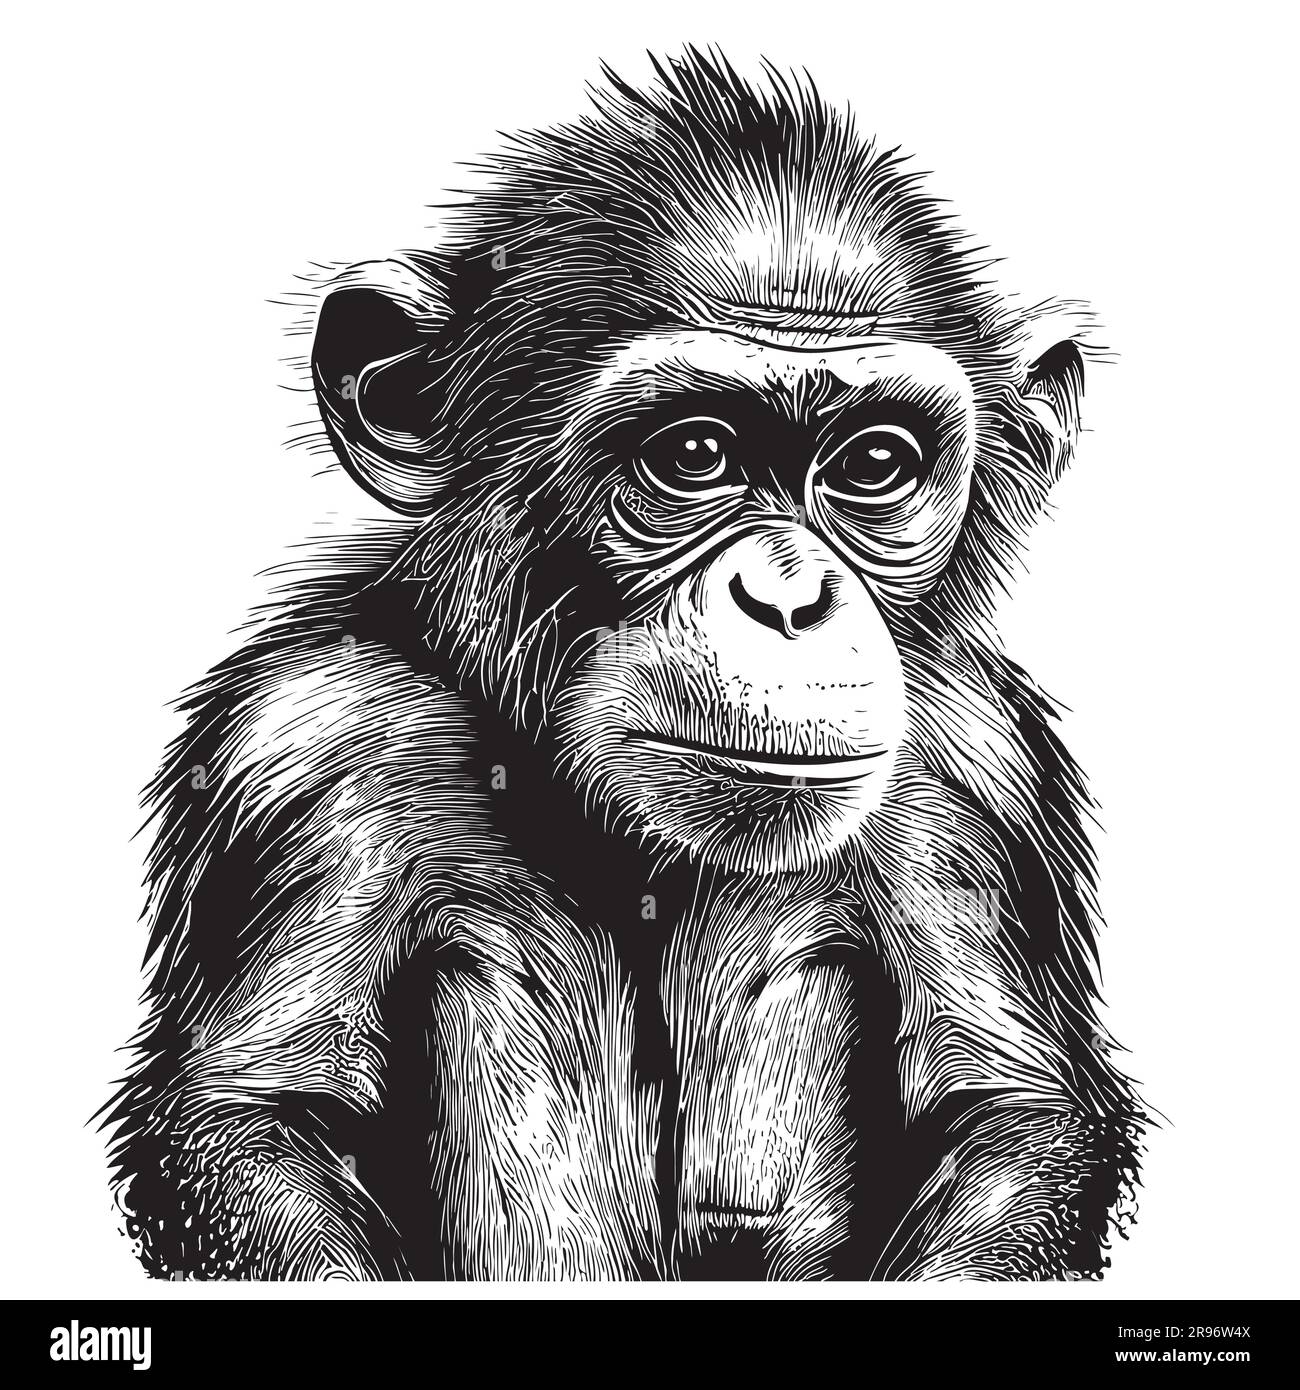 Smart Monkey sketch hand drawn in doodle style illustration Stock Vector